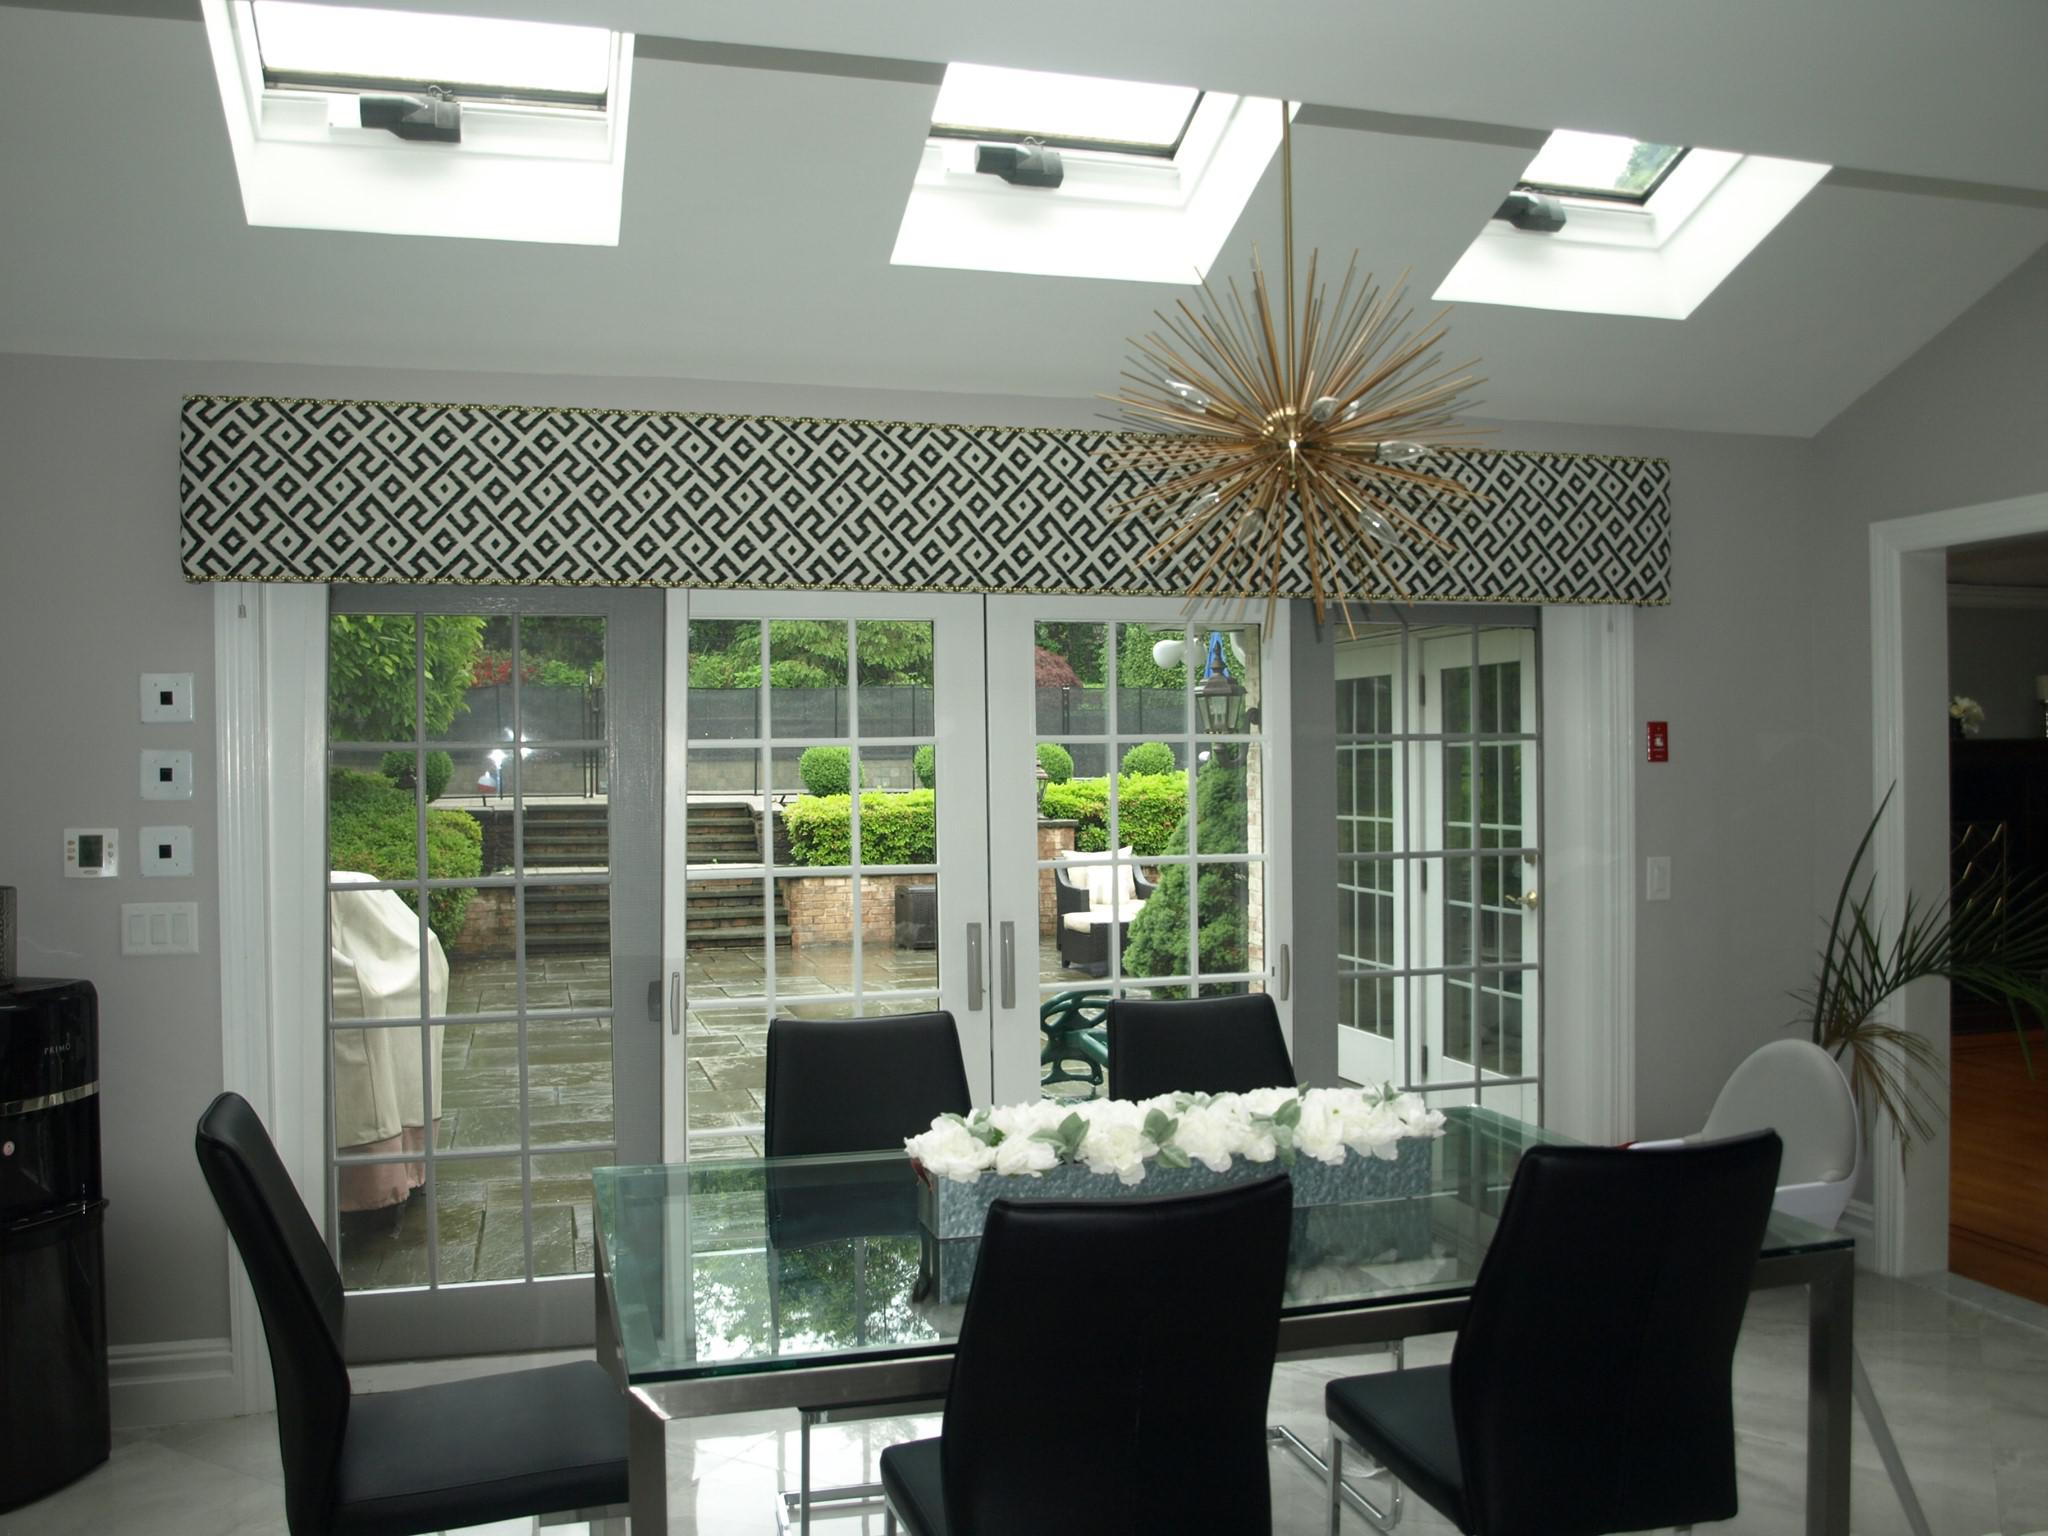 Patio doors and skylights can brighten up any room. However, that alone can leave something to be desired...but what? A custom cornice in the perfect pattern is your answer! Call Budget Blinds of Tyson's Corner & Herndon for your finishing touch!  BudgetBlindsOfTyson's Corner  FreeConsultation  Wind